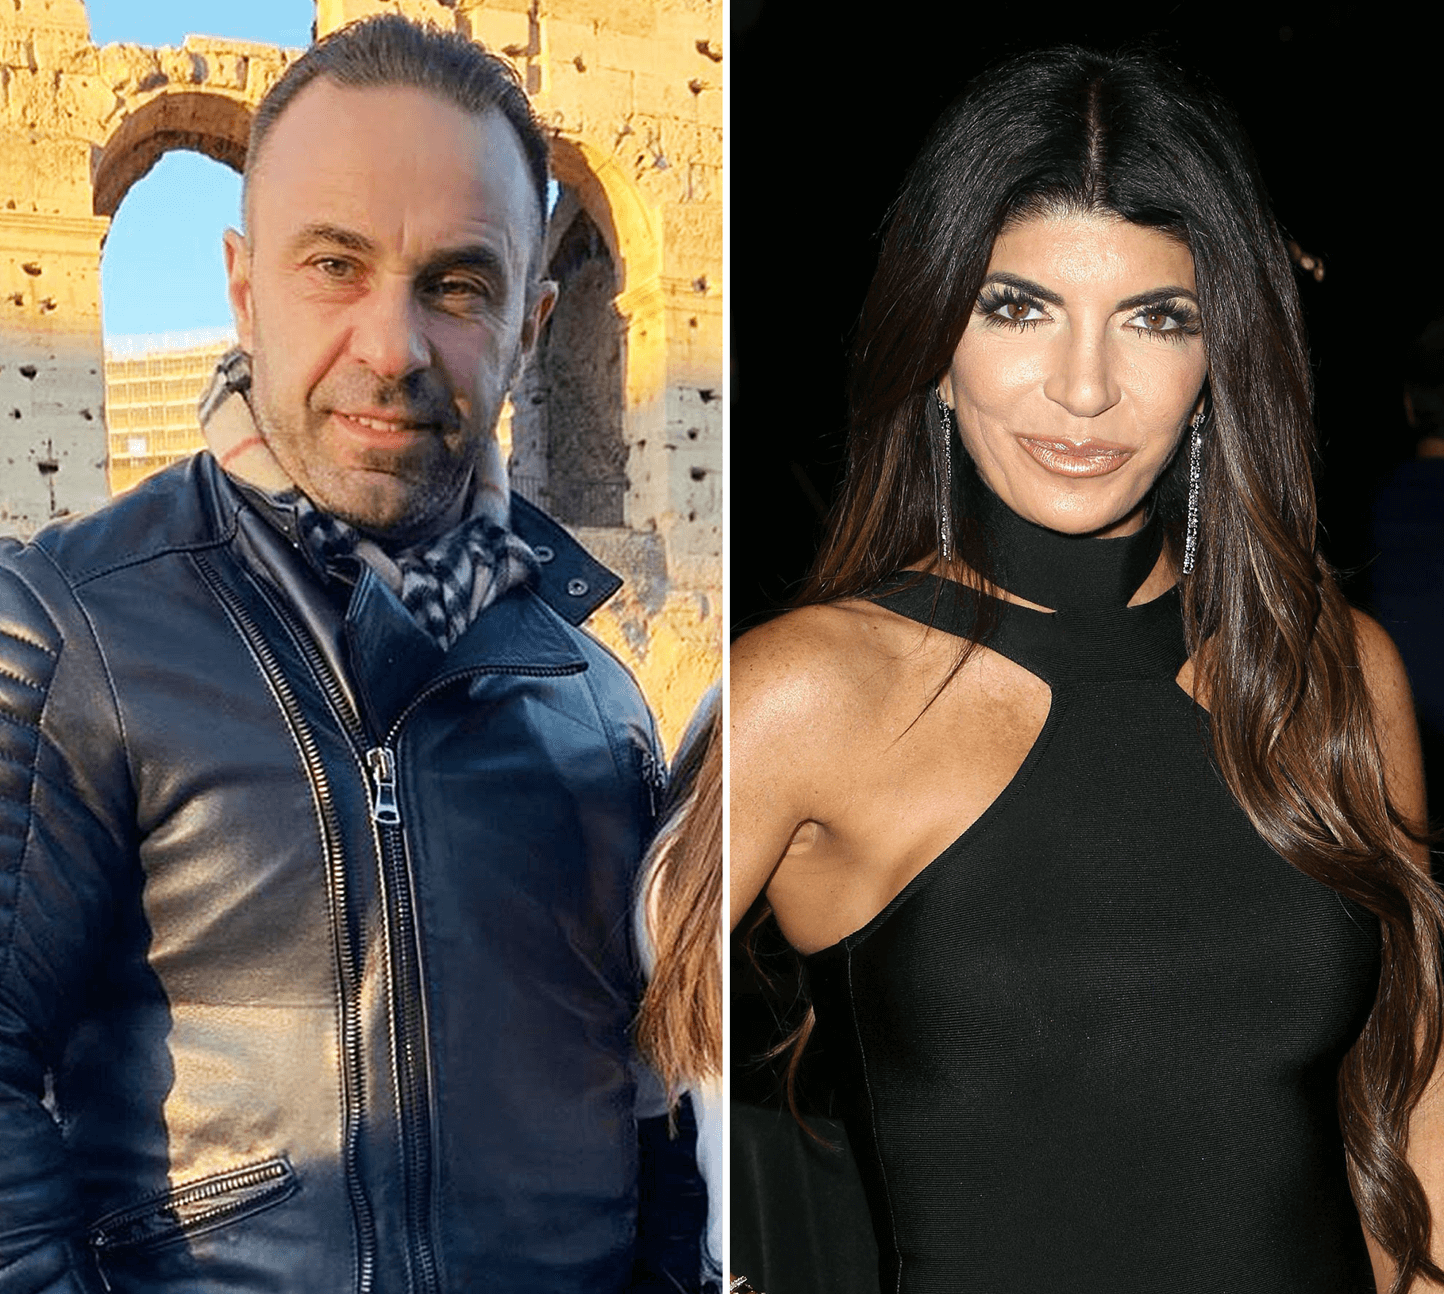 Joe Giudice Brags About ‘Great Food And Great Sex’ As He Flirts With Italian Waitress!